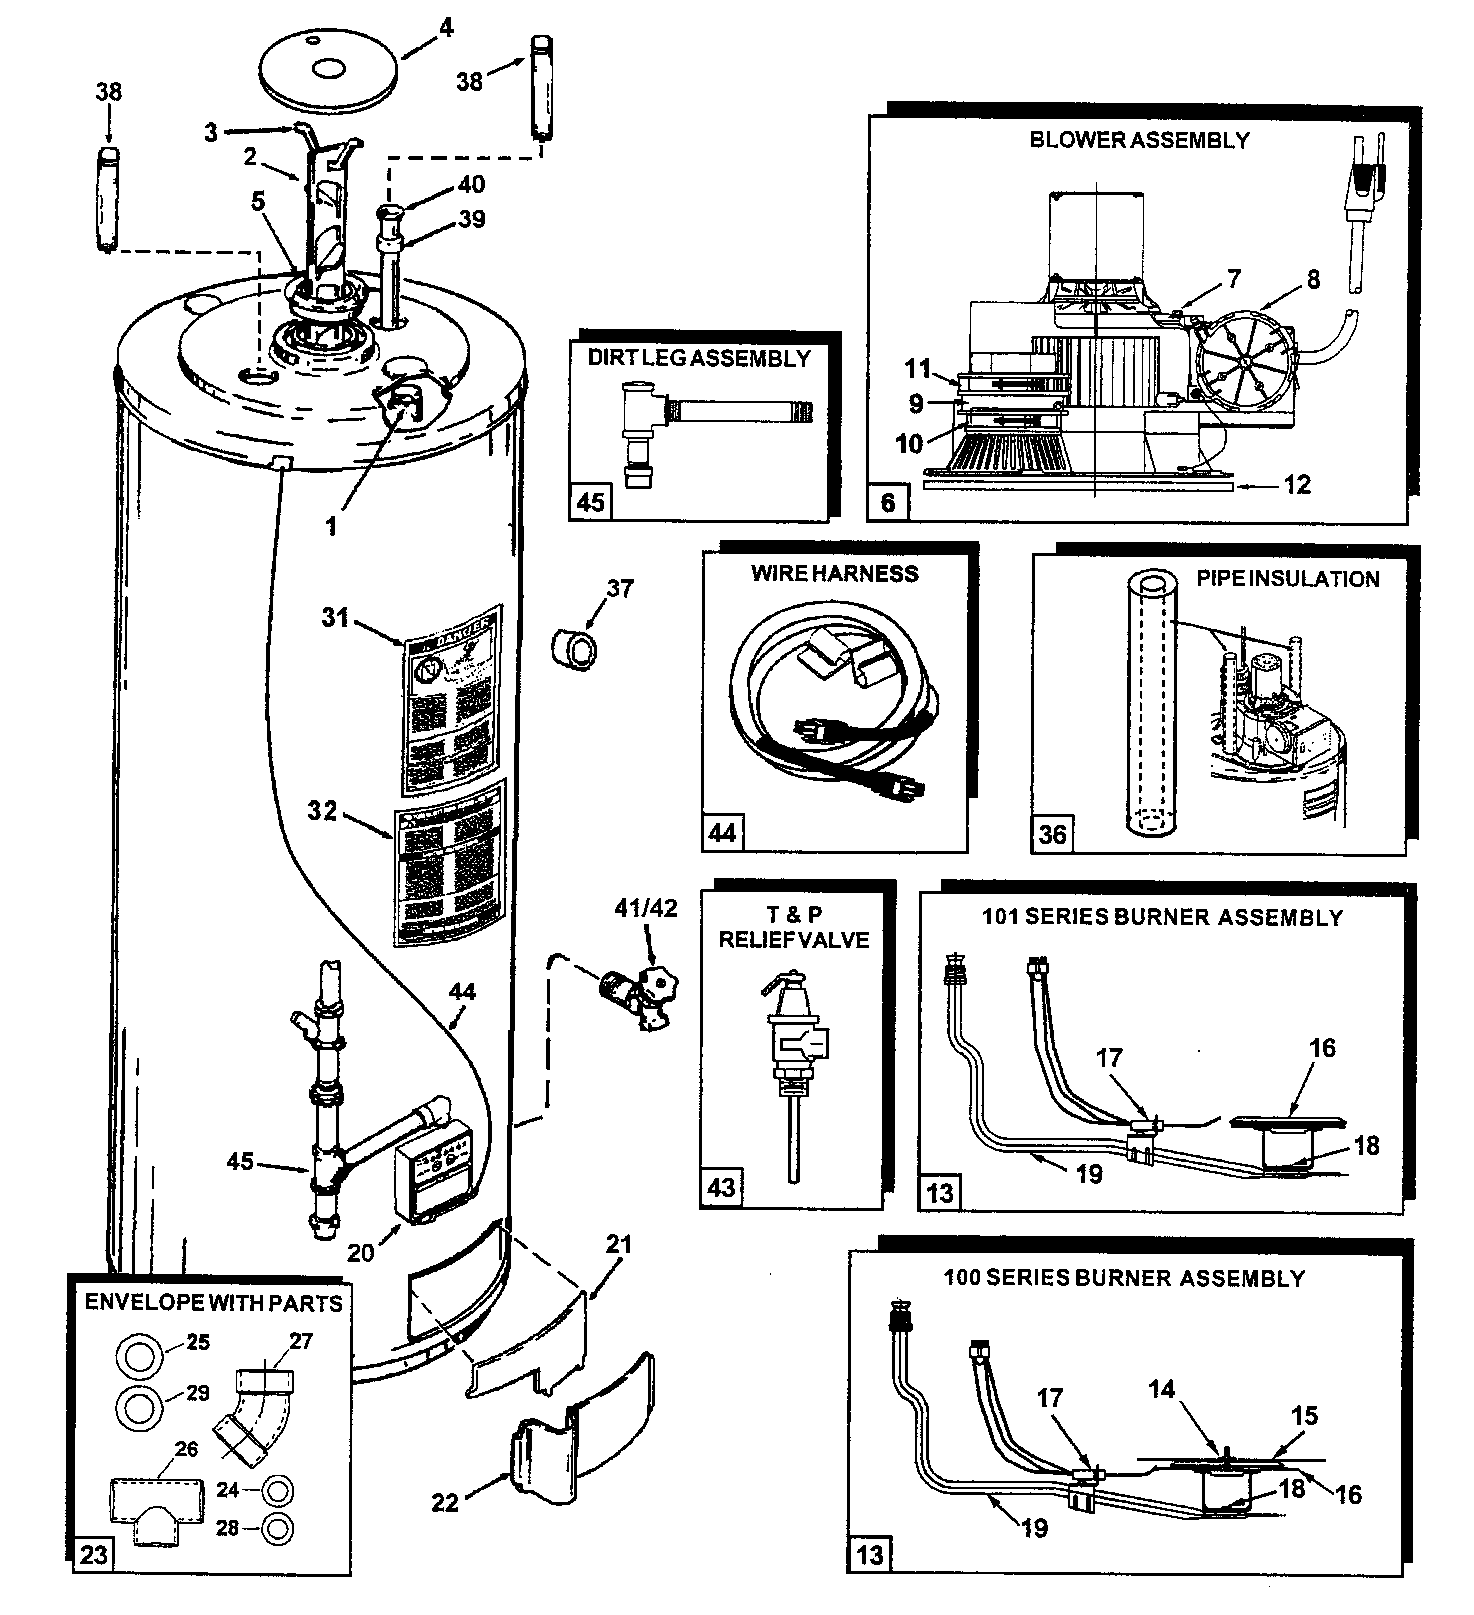 Hot Water Heater Element Wiring Diagram from c.searspartsdirect.com